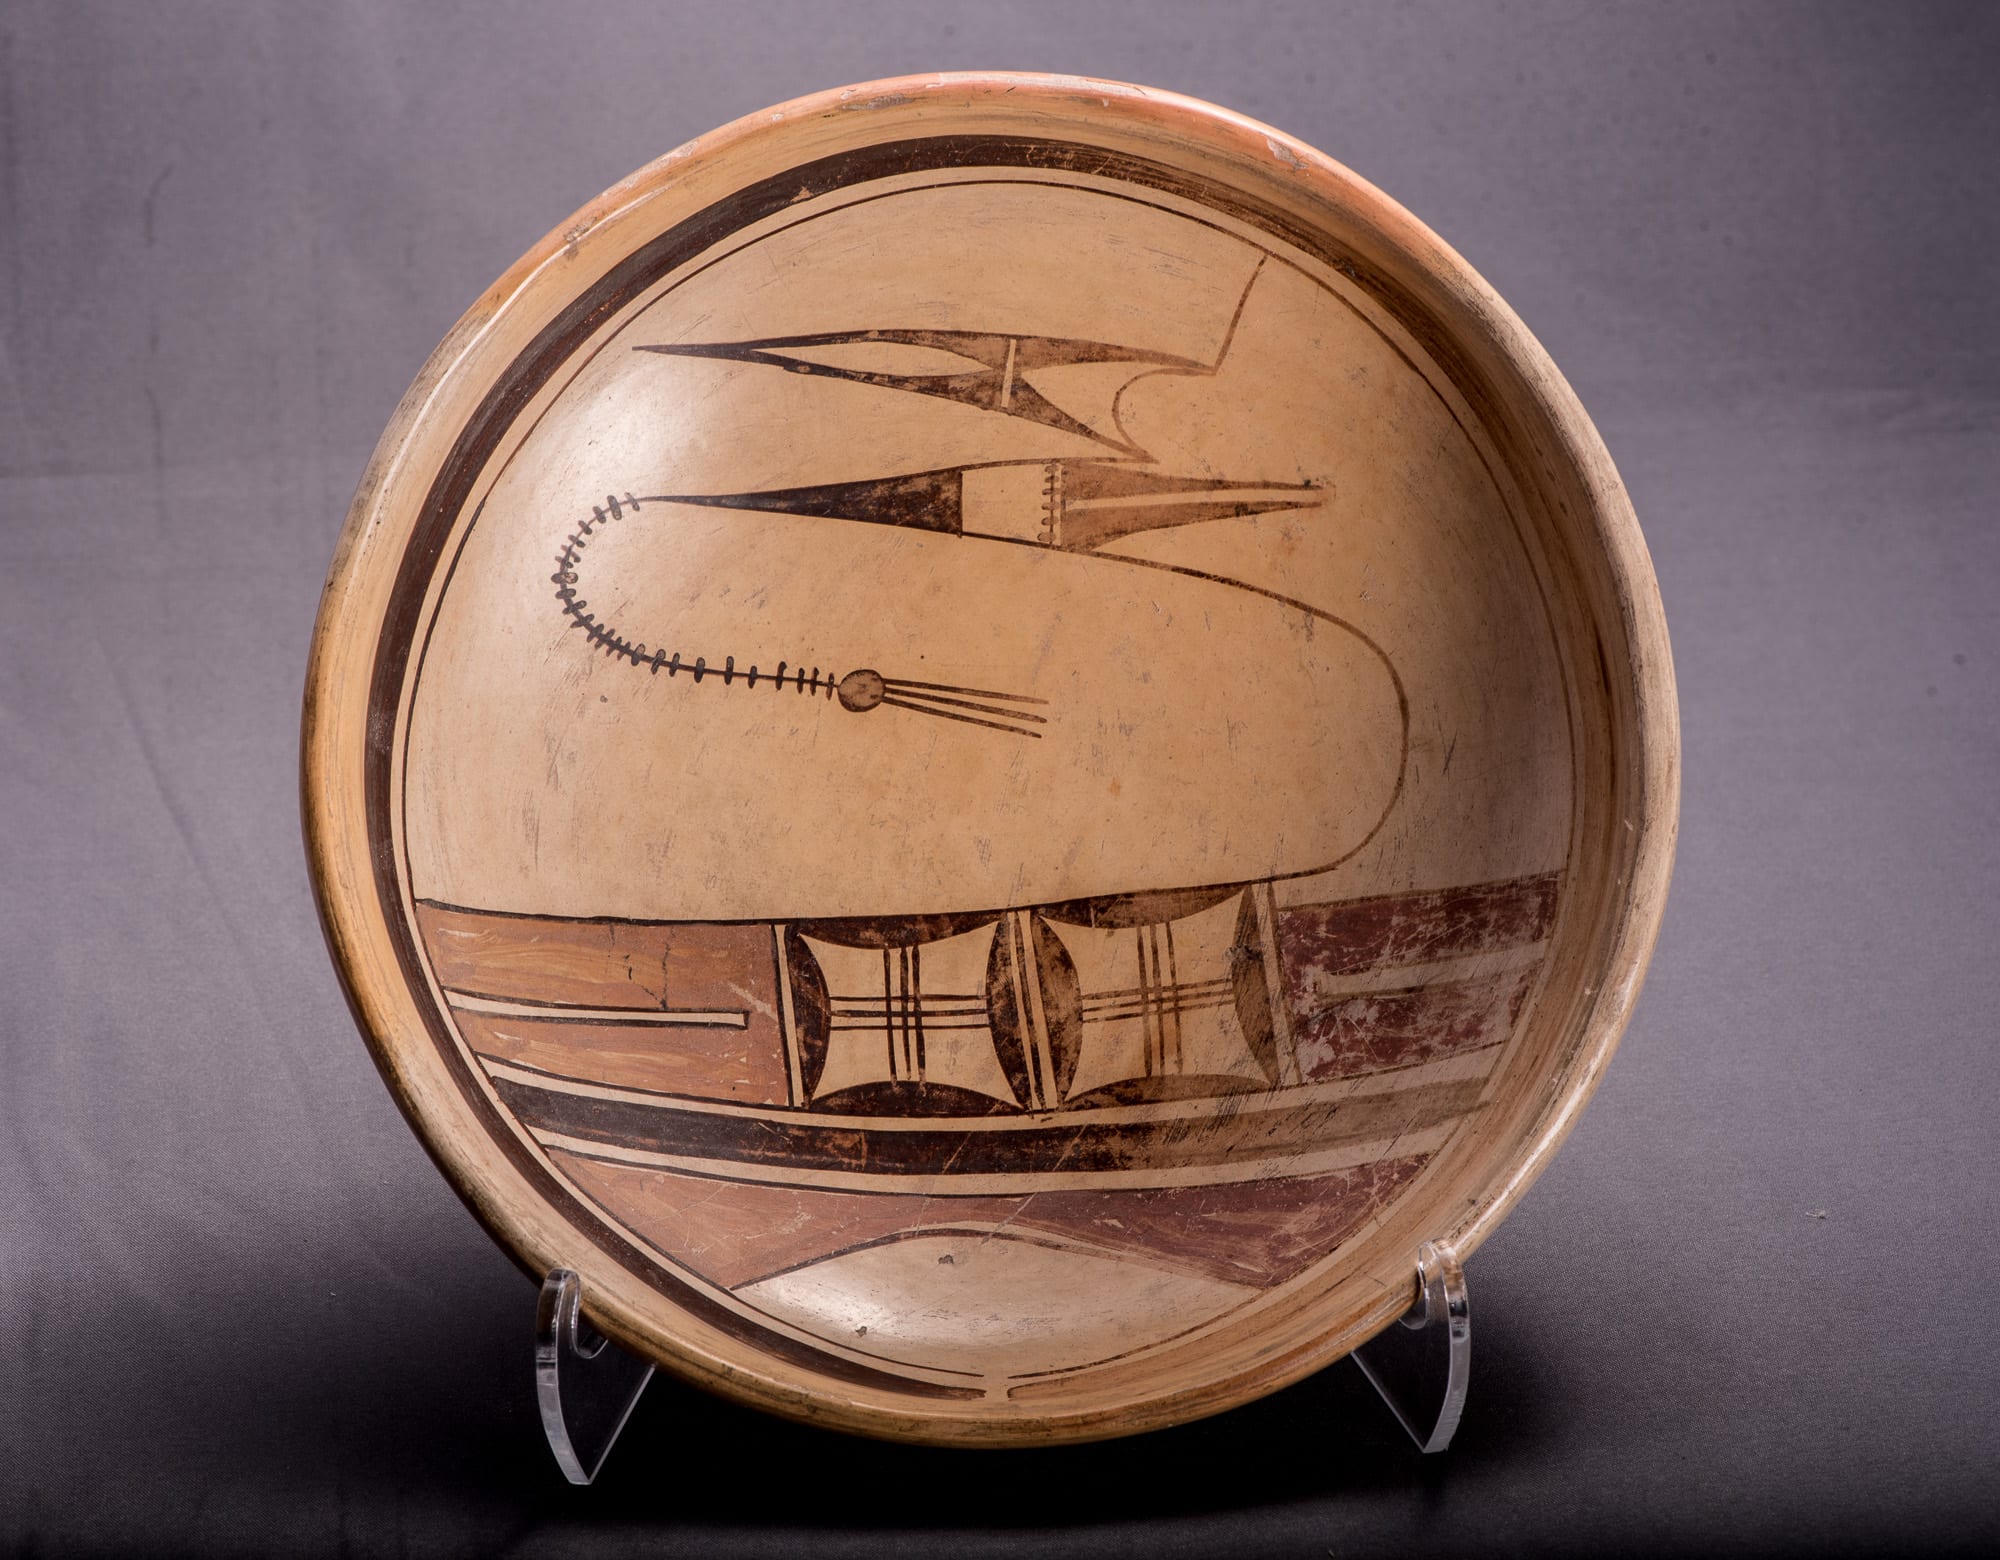 2014-13 Dish with insect variation of  “bird hanging from skyband” design